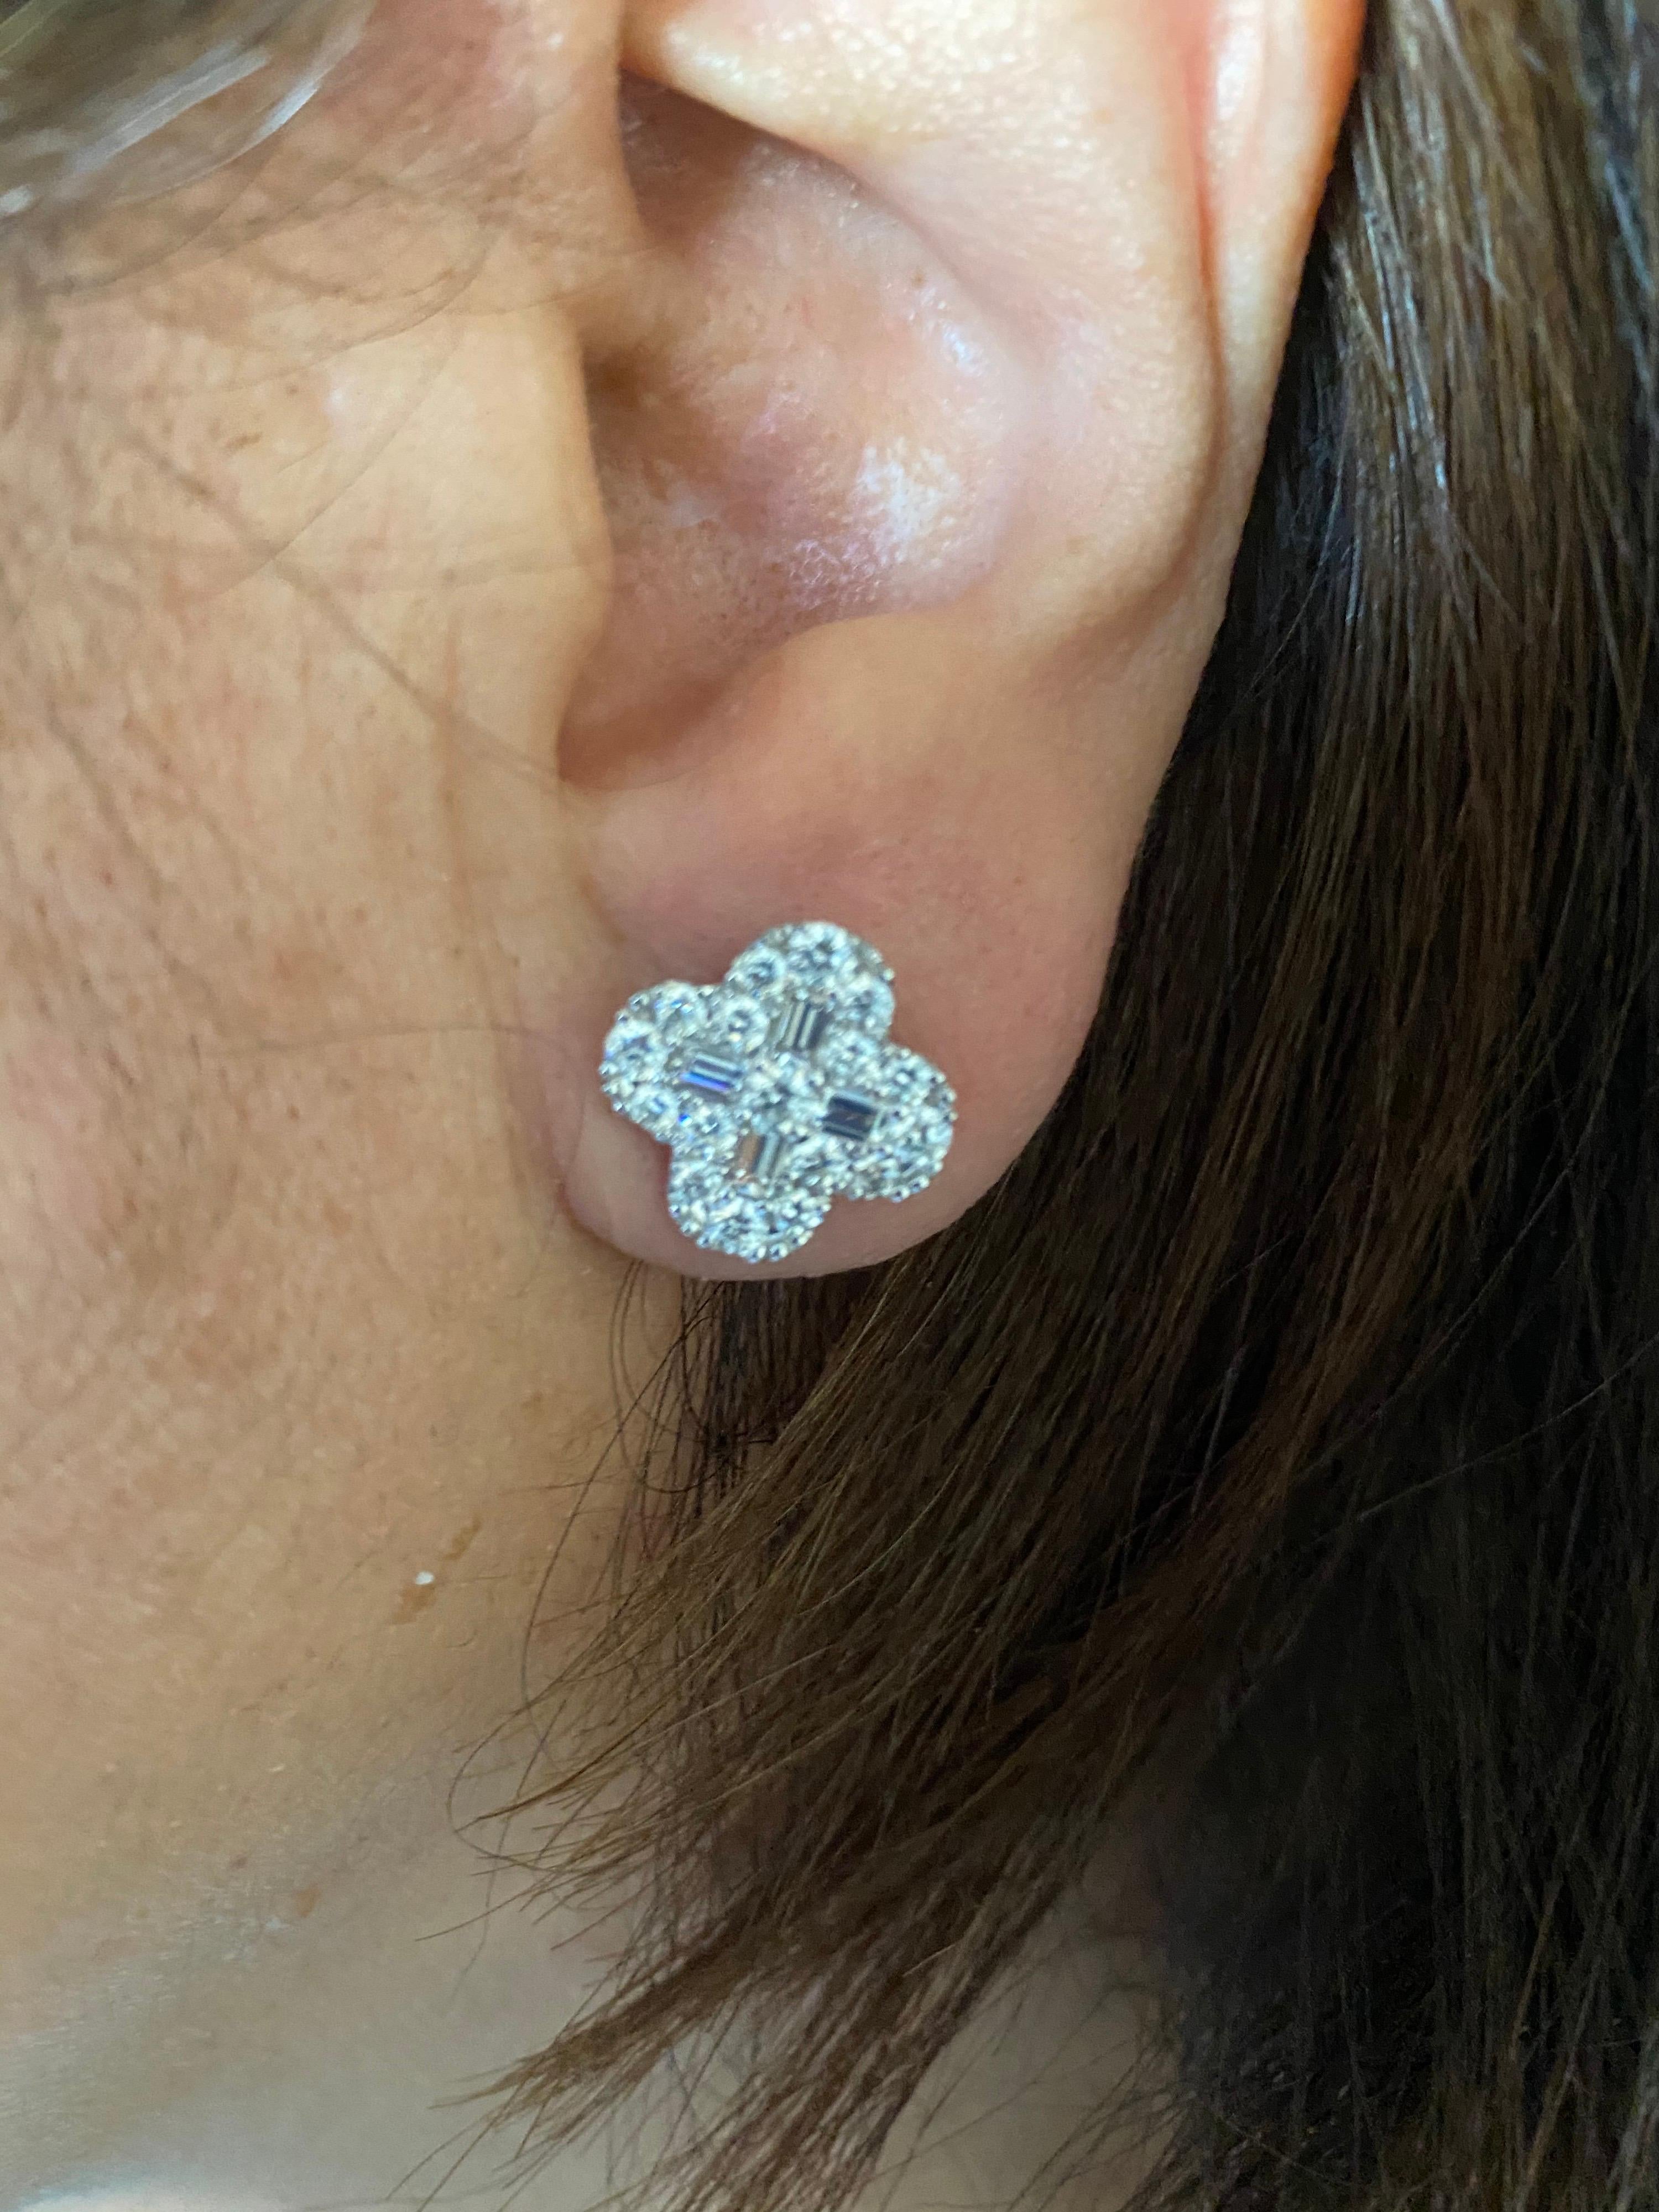 18K white gold diamond earring set in a clover Van Cleef shape. The earrings are set with baguette and round diamonds. The total carat weight is 2.12. The color of the stones are F, the clarity is VS1-VS2.